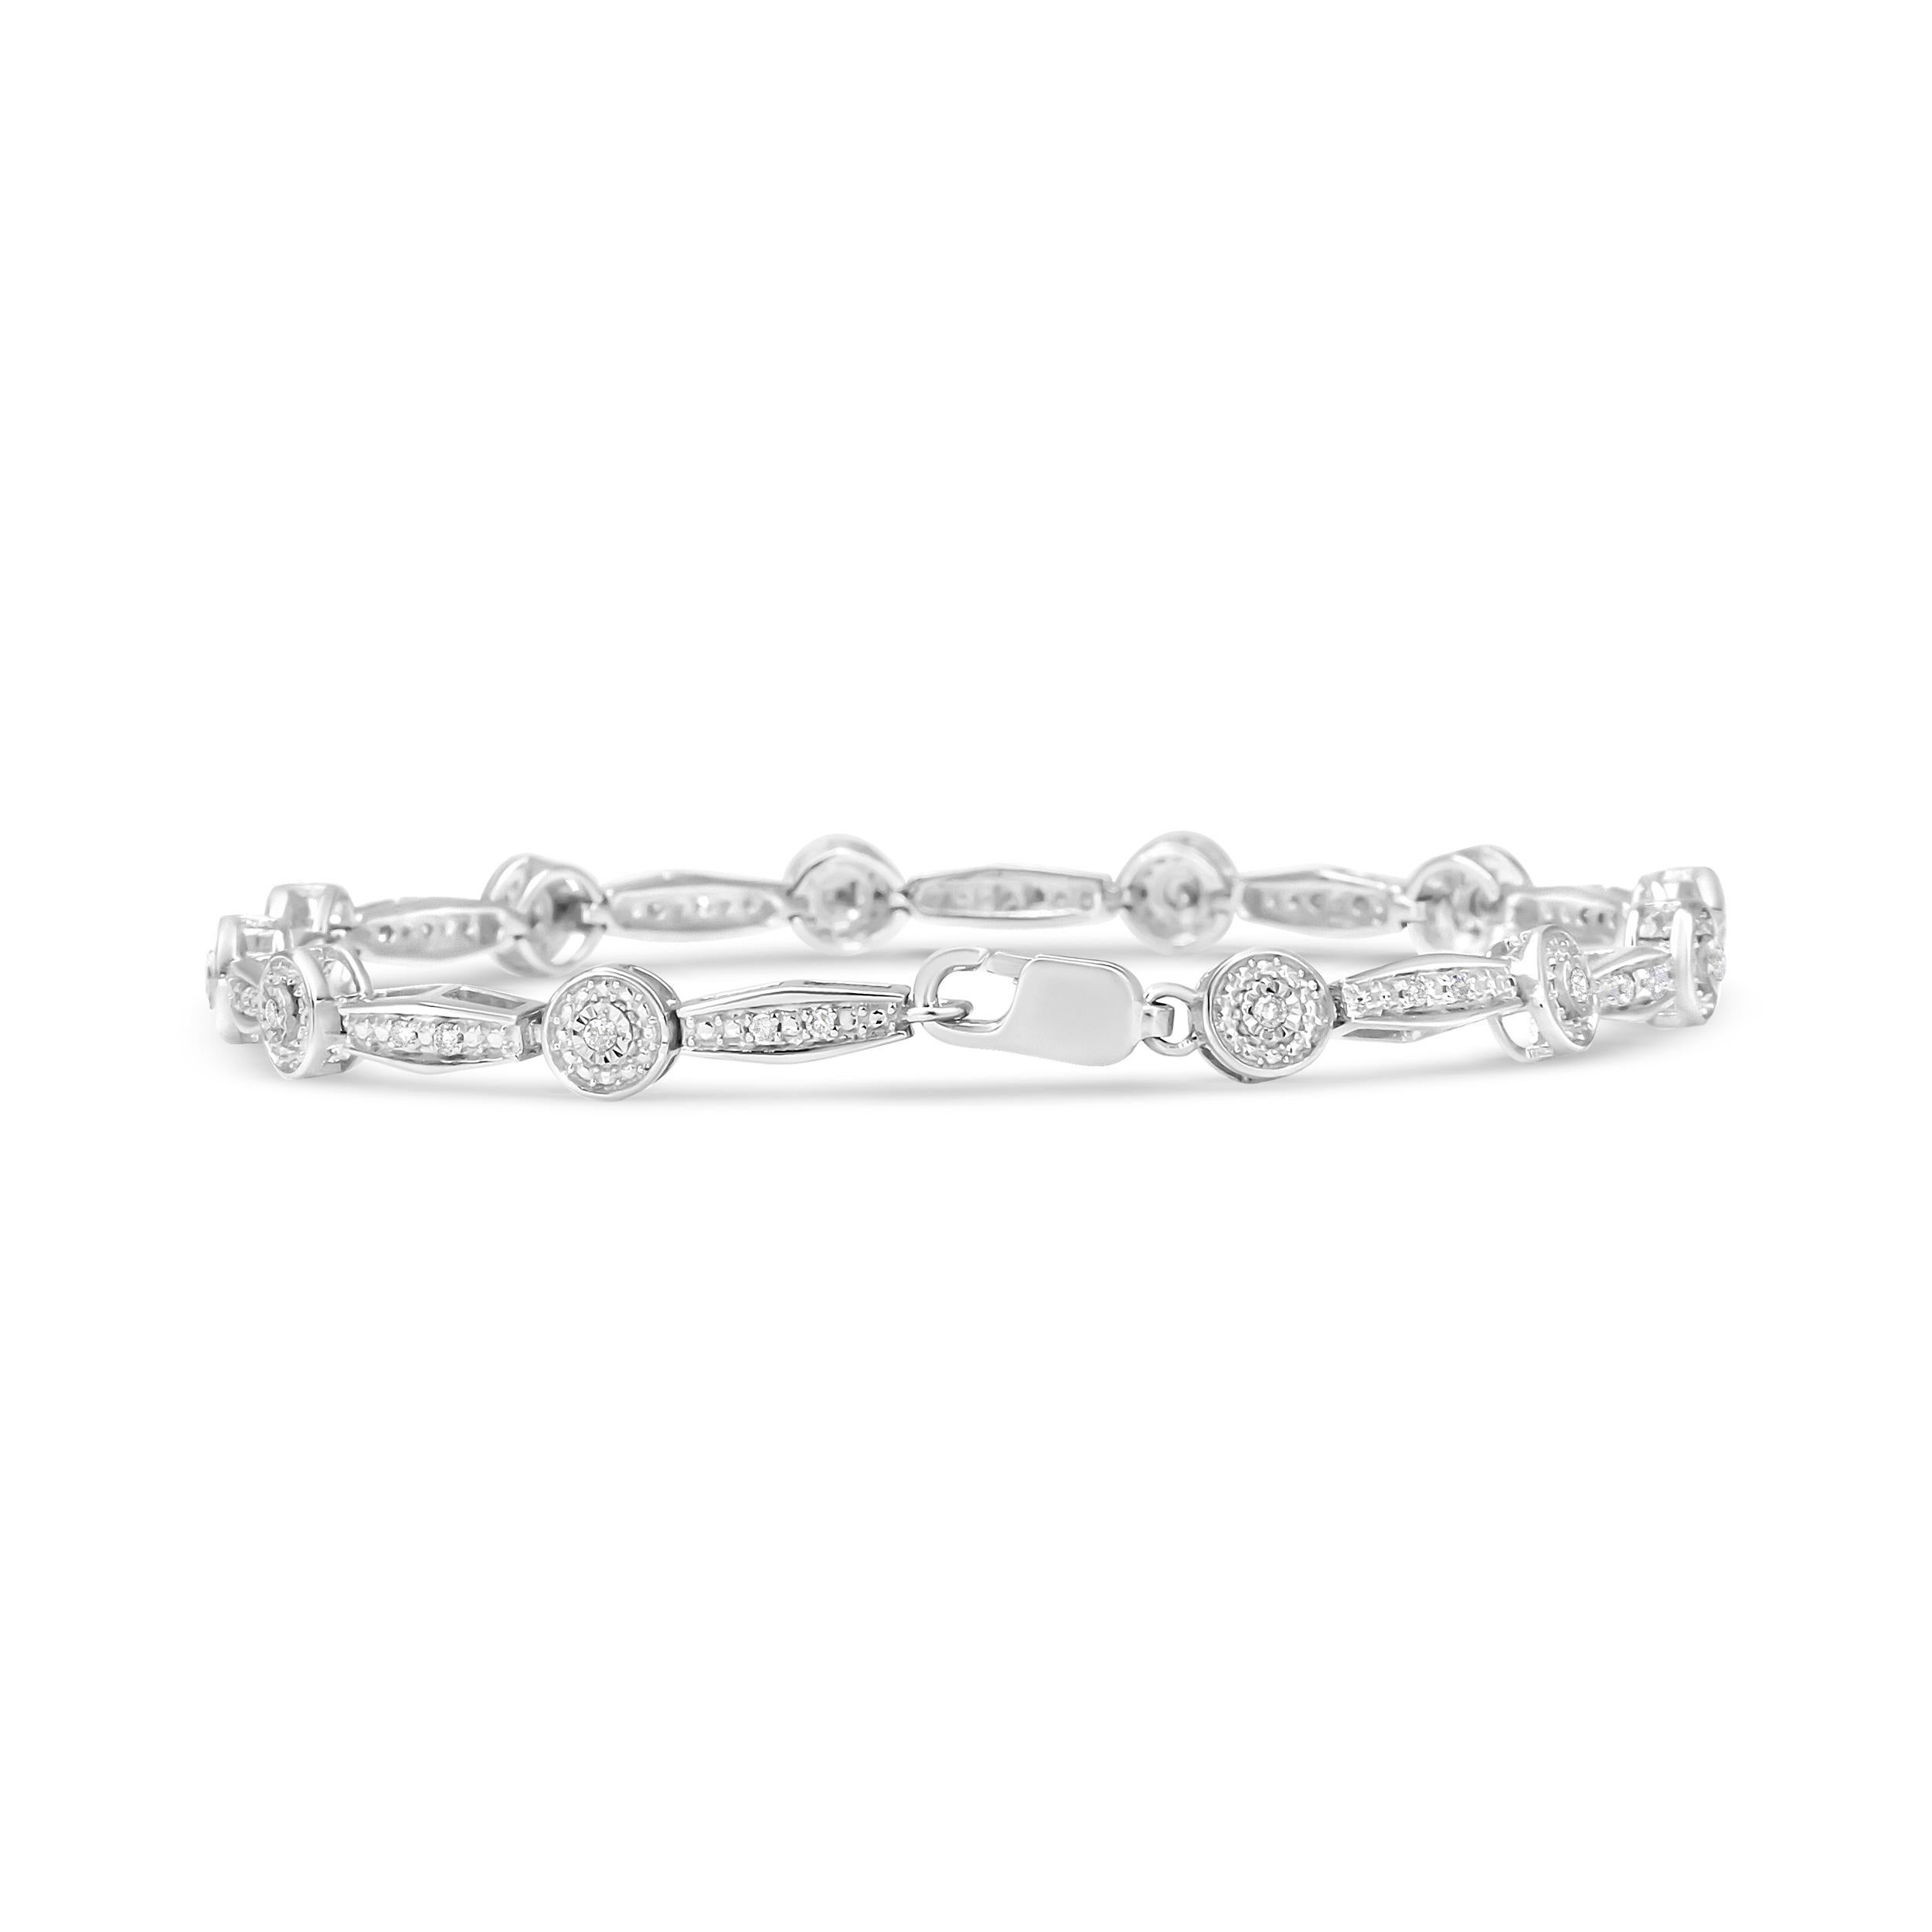 Showcasing a stunning link pattern studded with round white diamonds, this .925 sterling silver bracelet instantly adds a pop of sparkle to any ensemble. Stunning centerpiece diamonds are beautifully embellished in a stone enhancing miracle plate